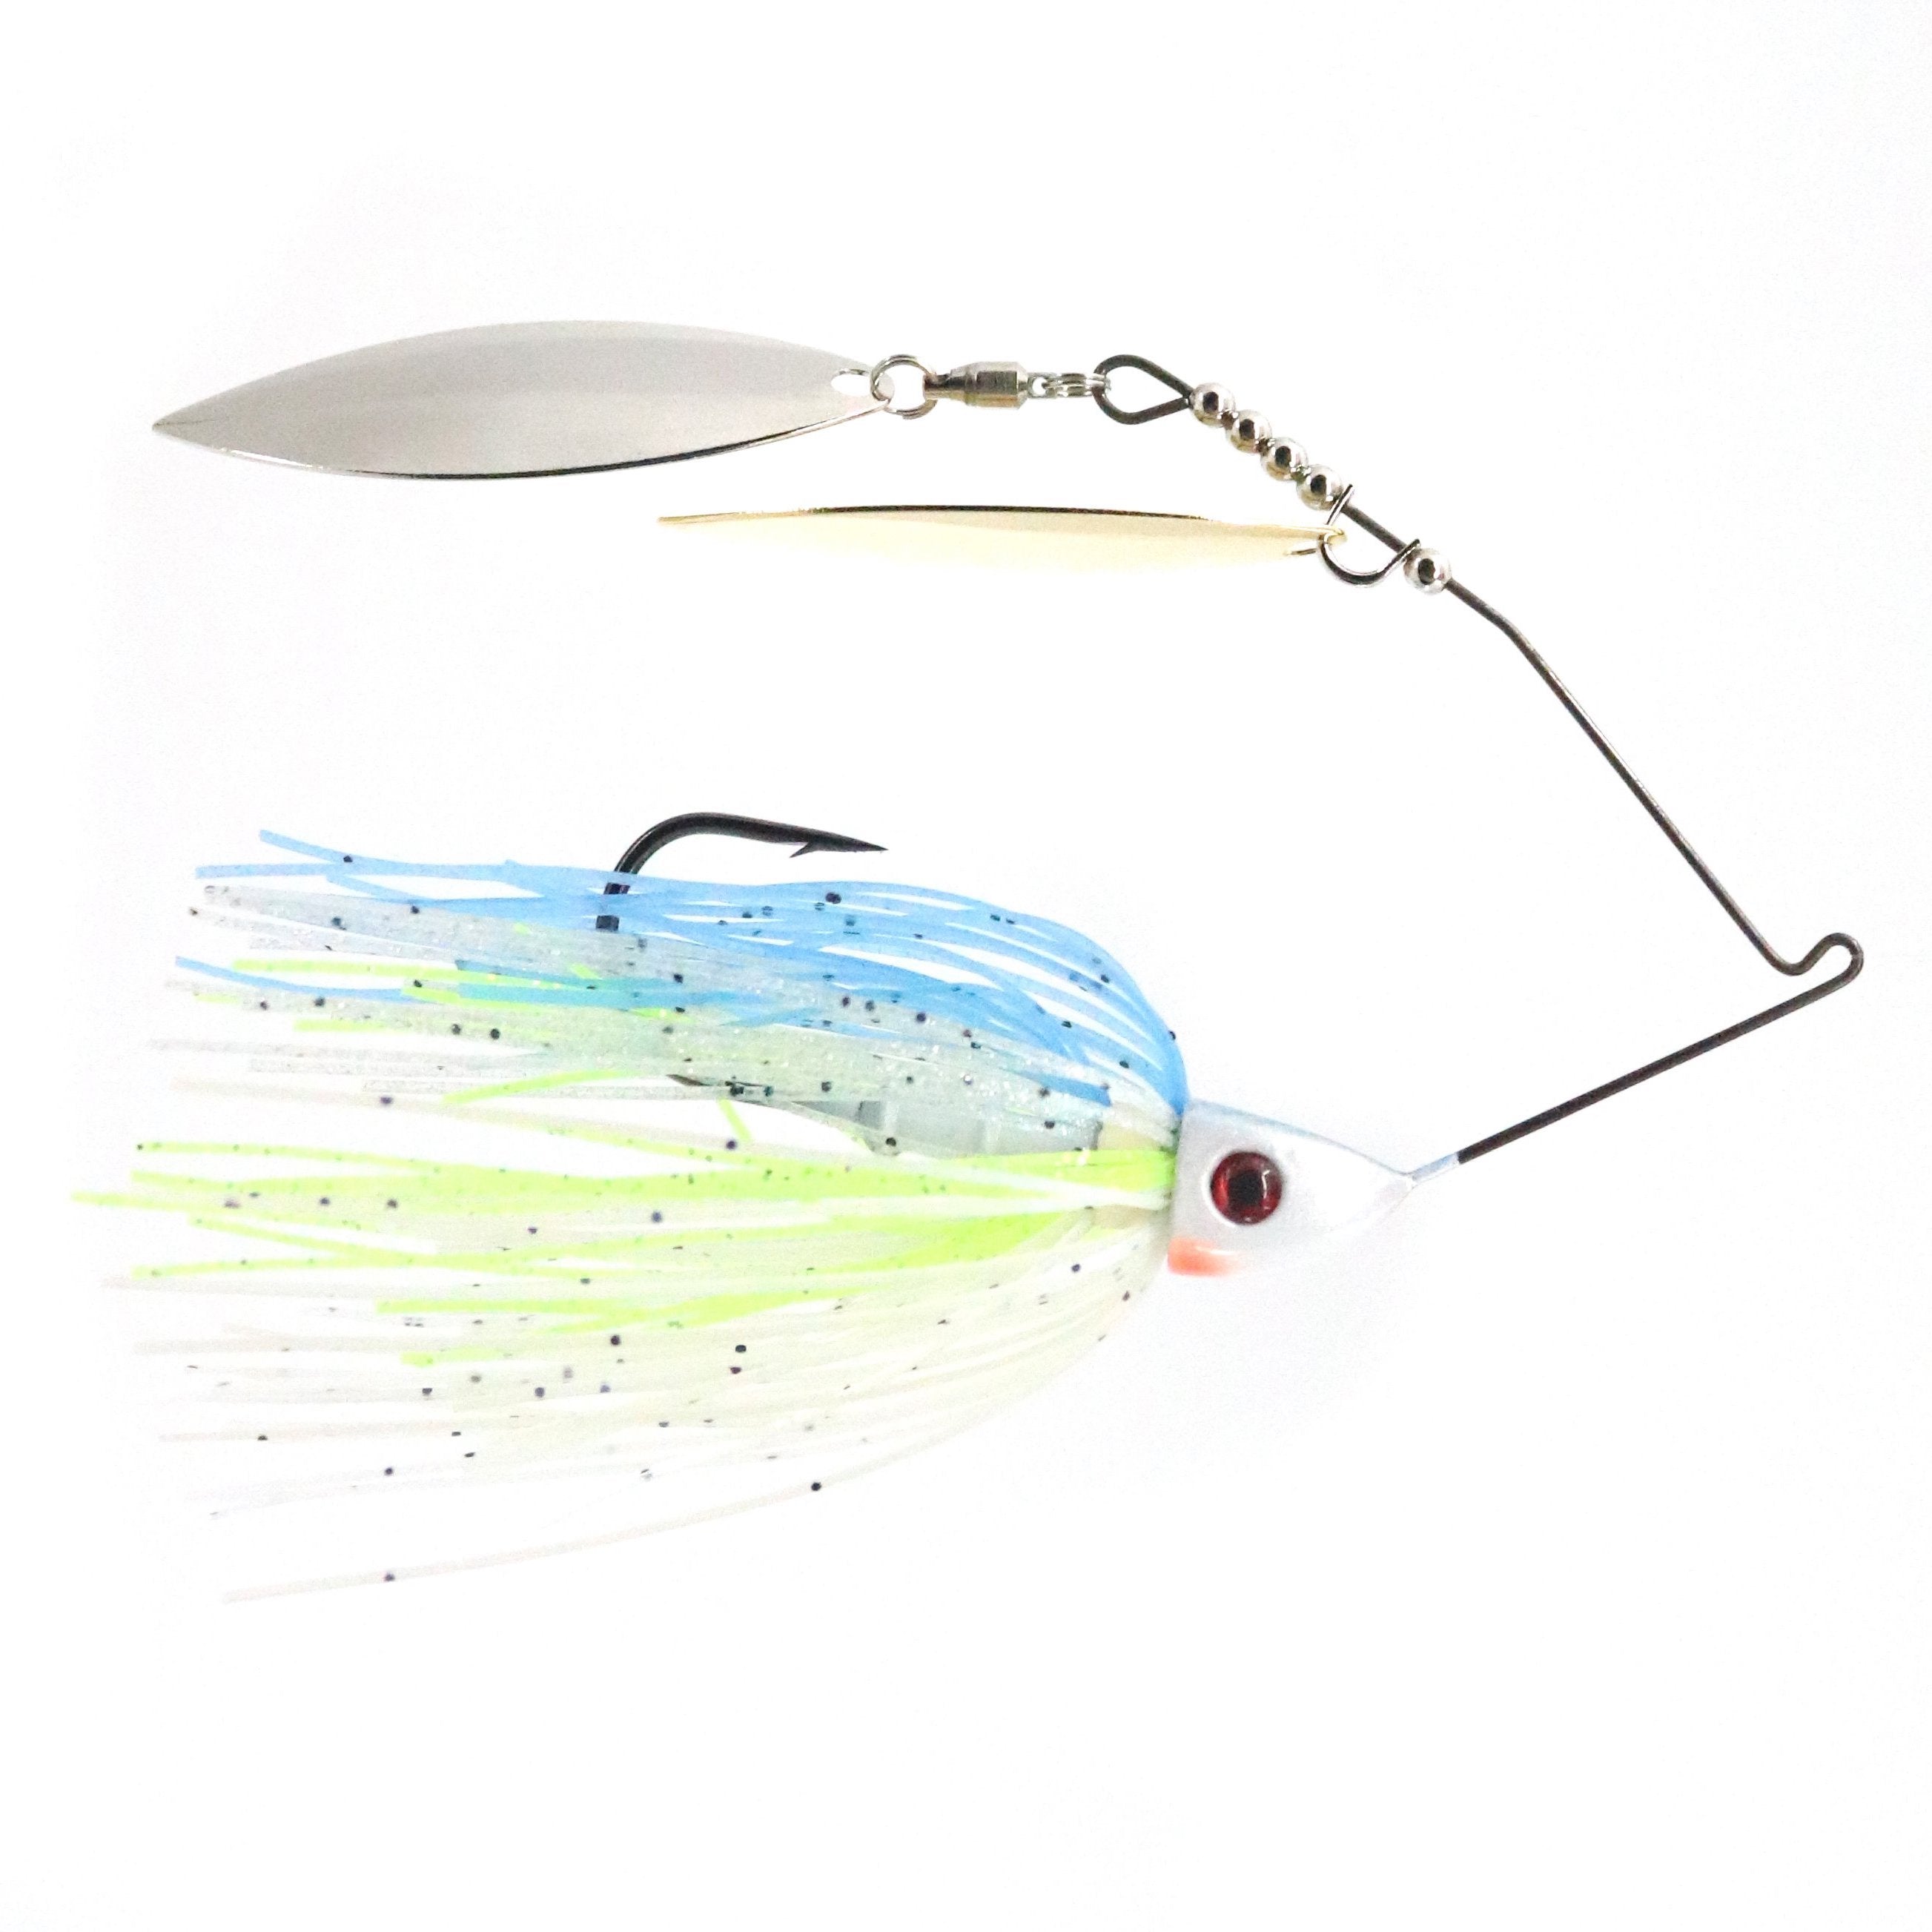 Bassman Spinnerbaits TW Series Double Willow Blades